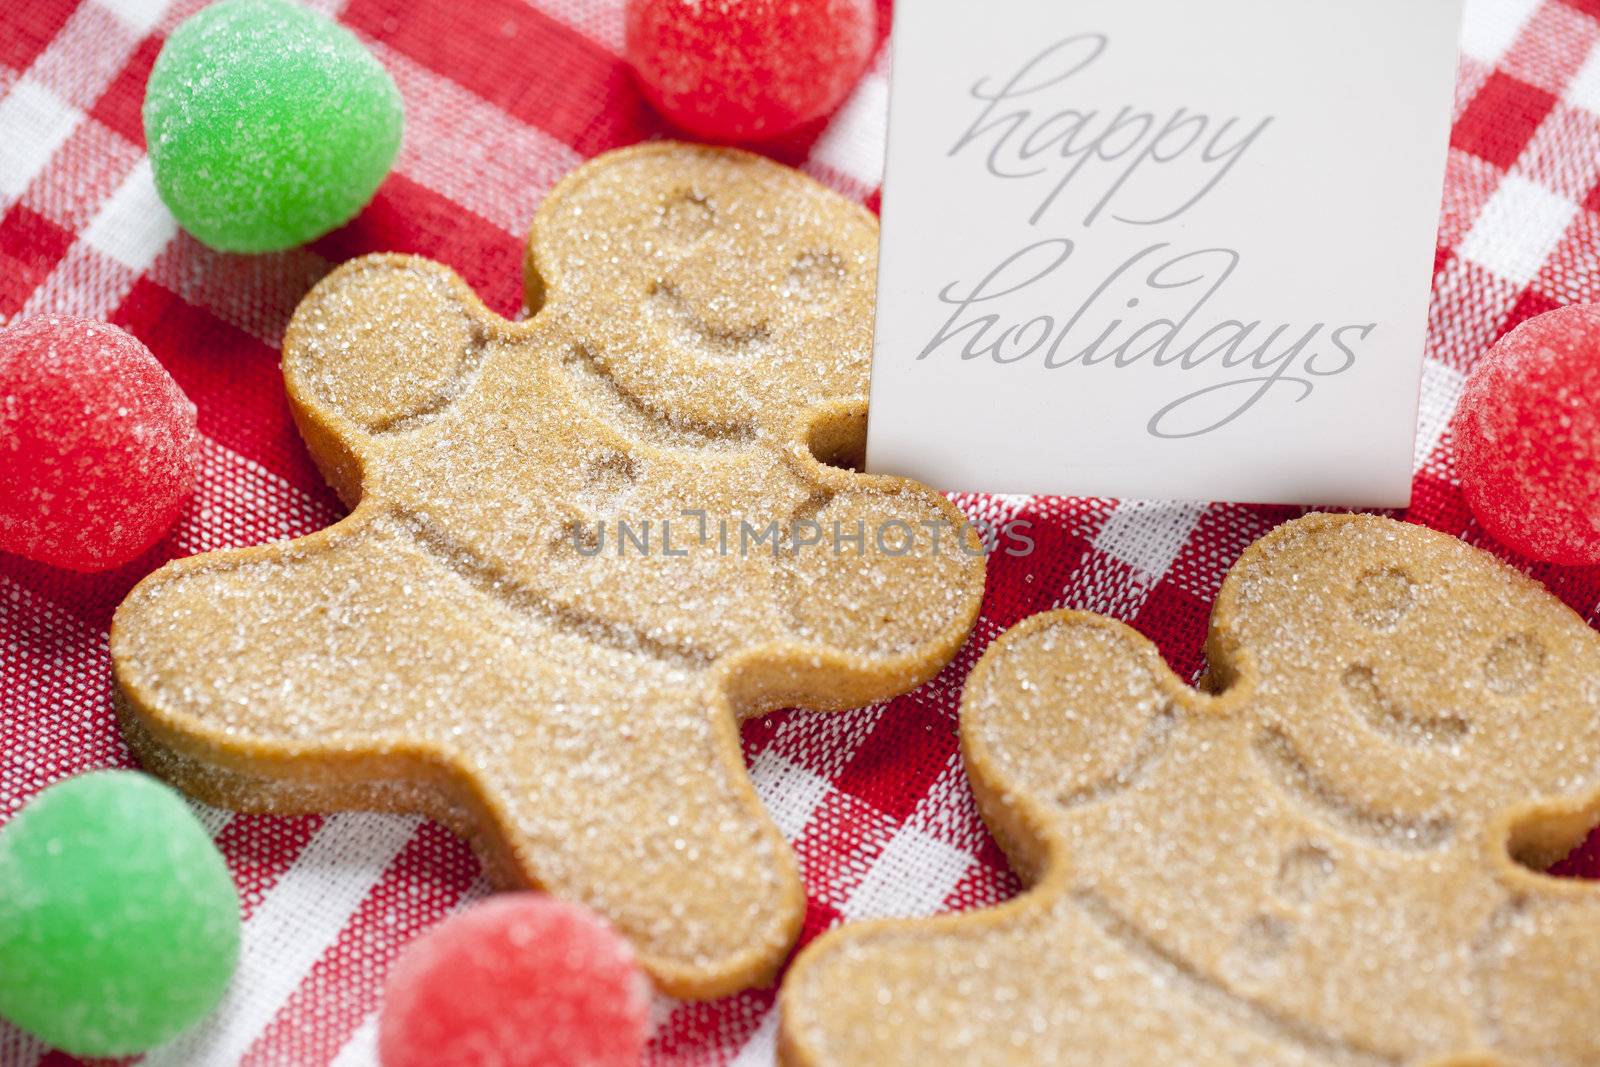 Close-up cropped image of gingerbread candies with happy holidays tag over red checked napkin.